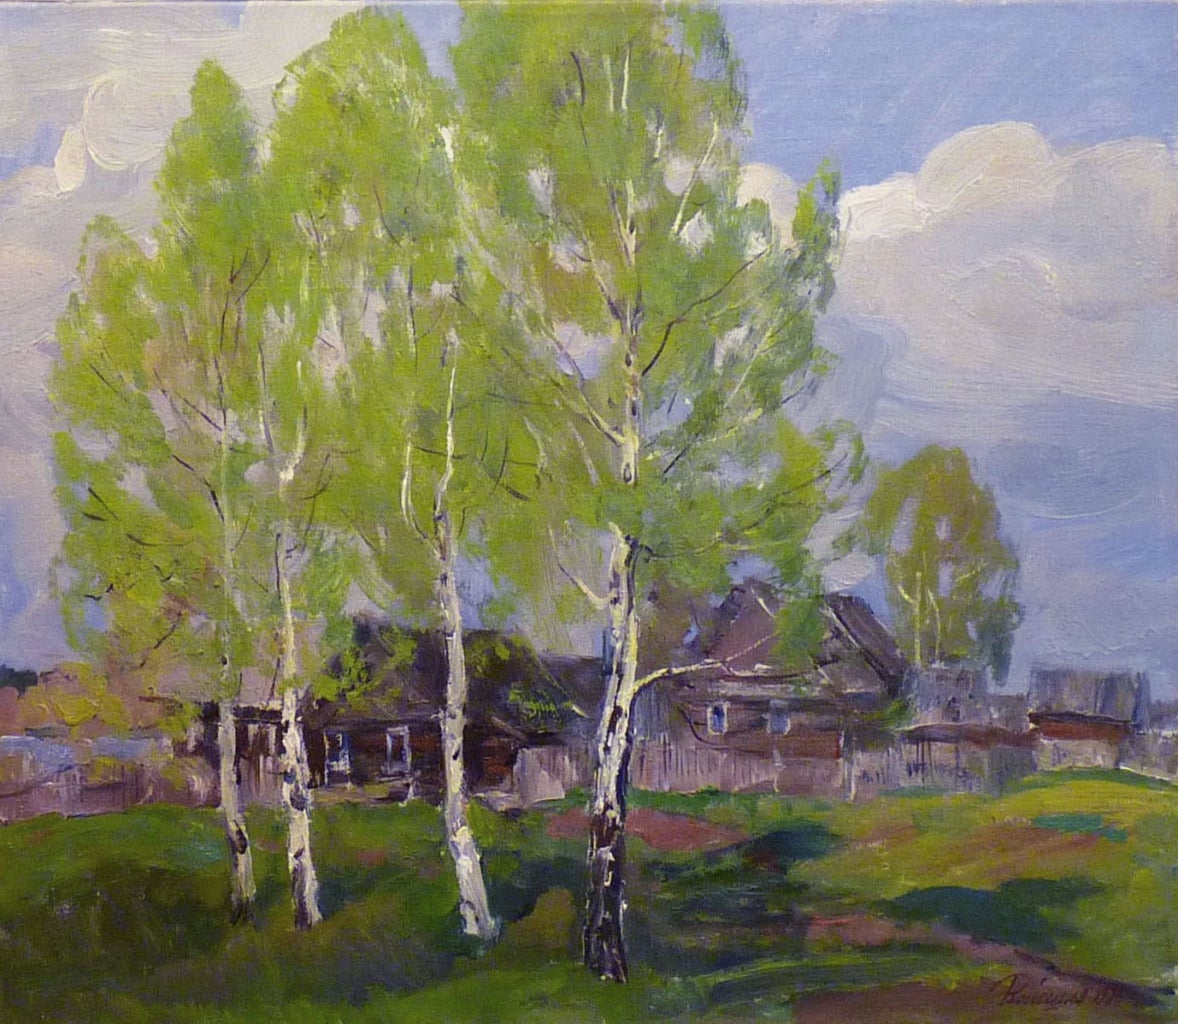 Early Spring - Painting by Leonid VAICHILIA